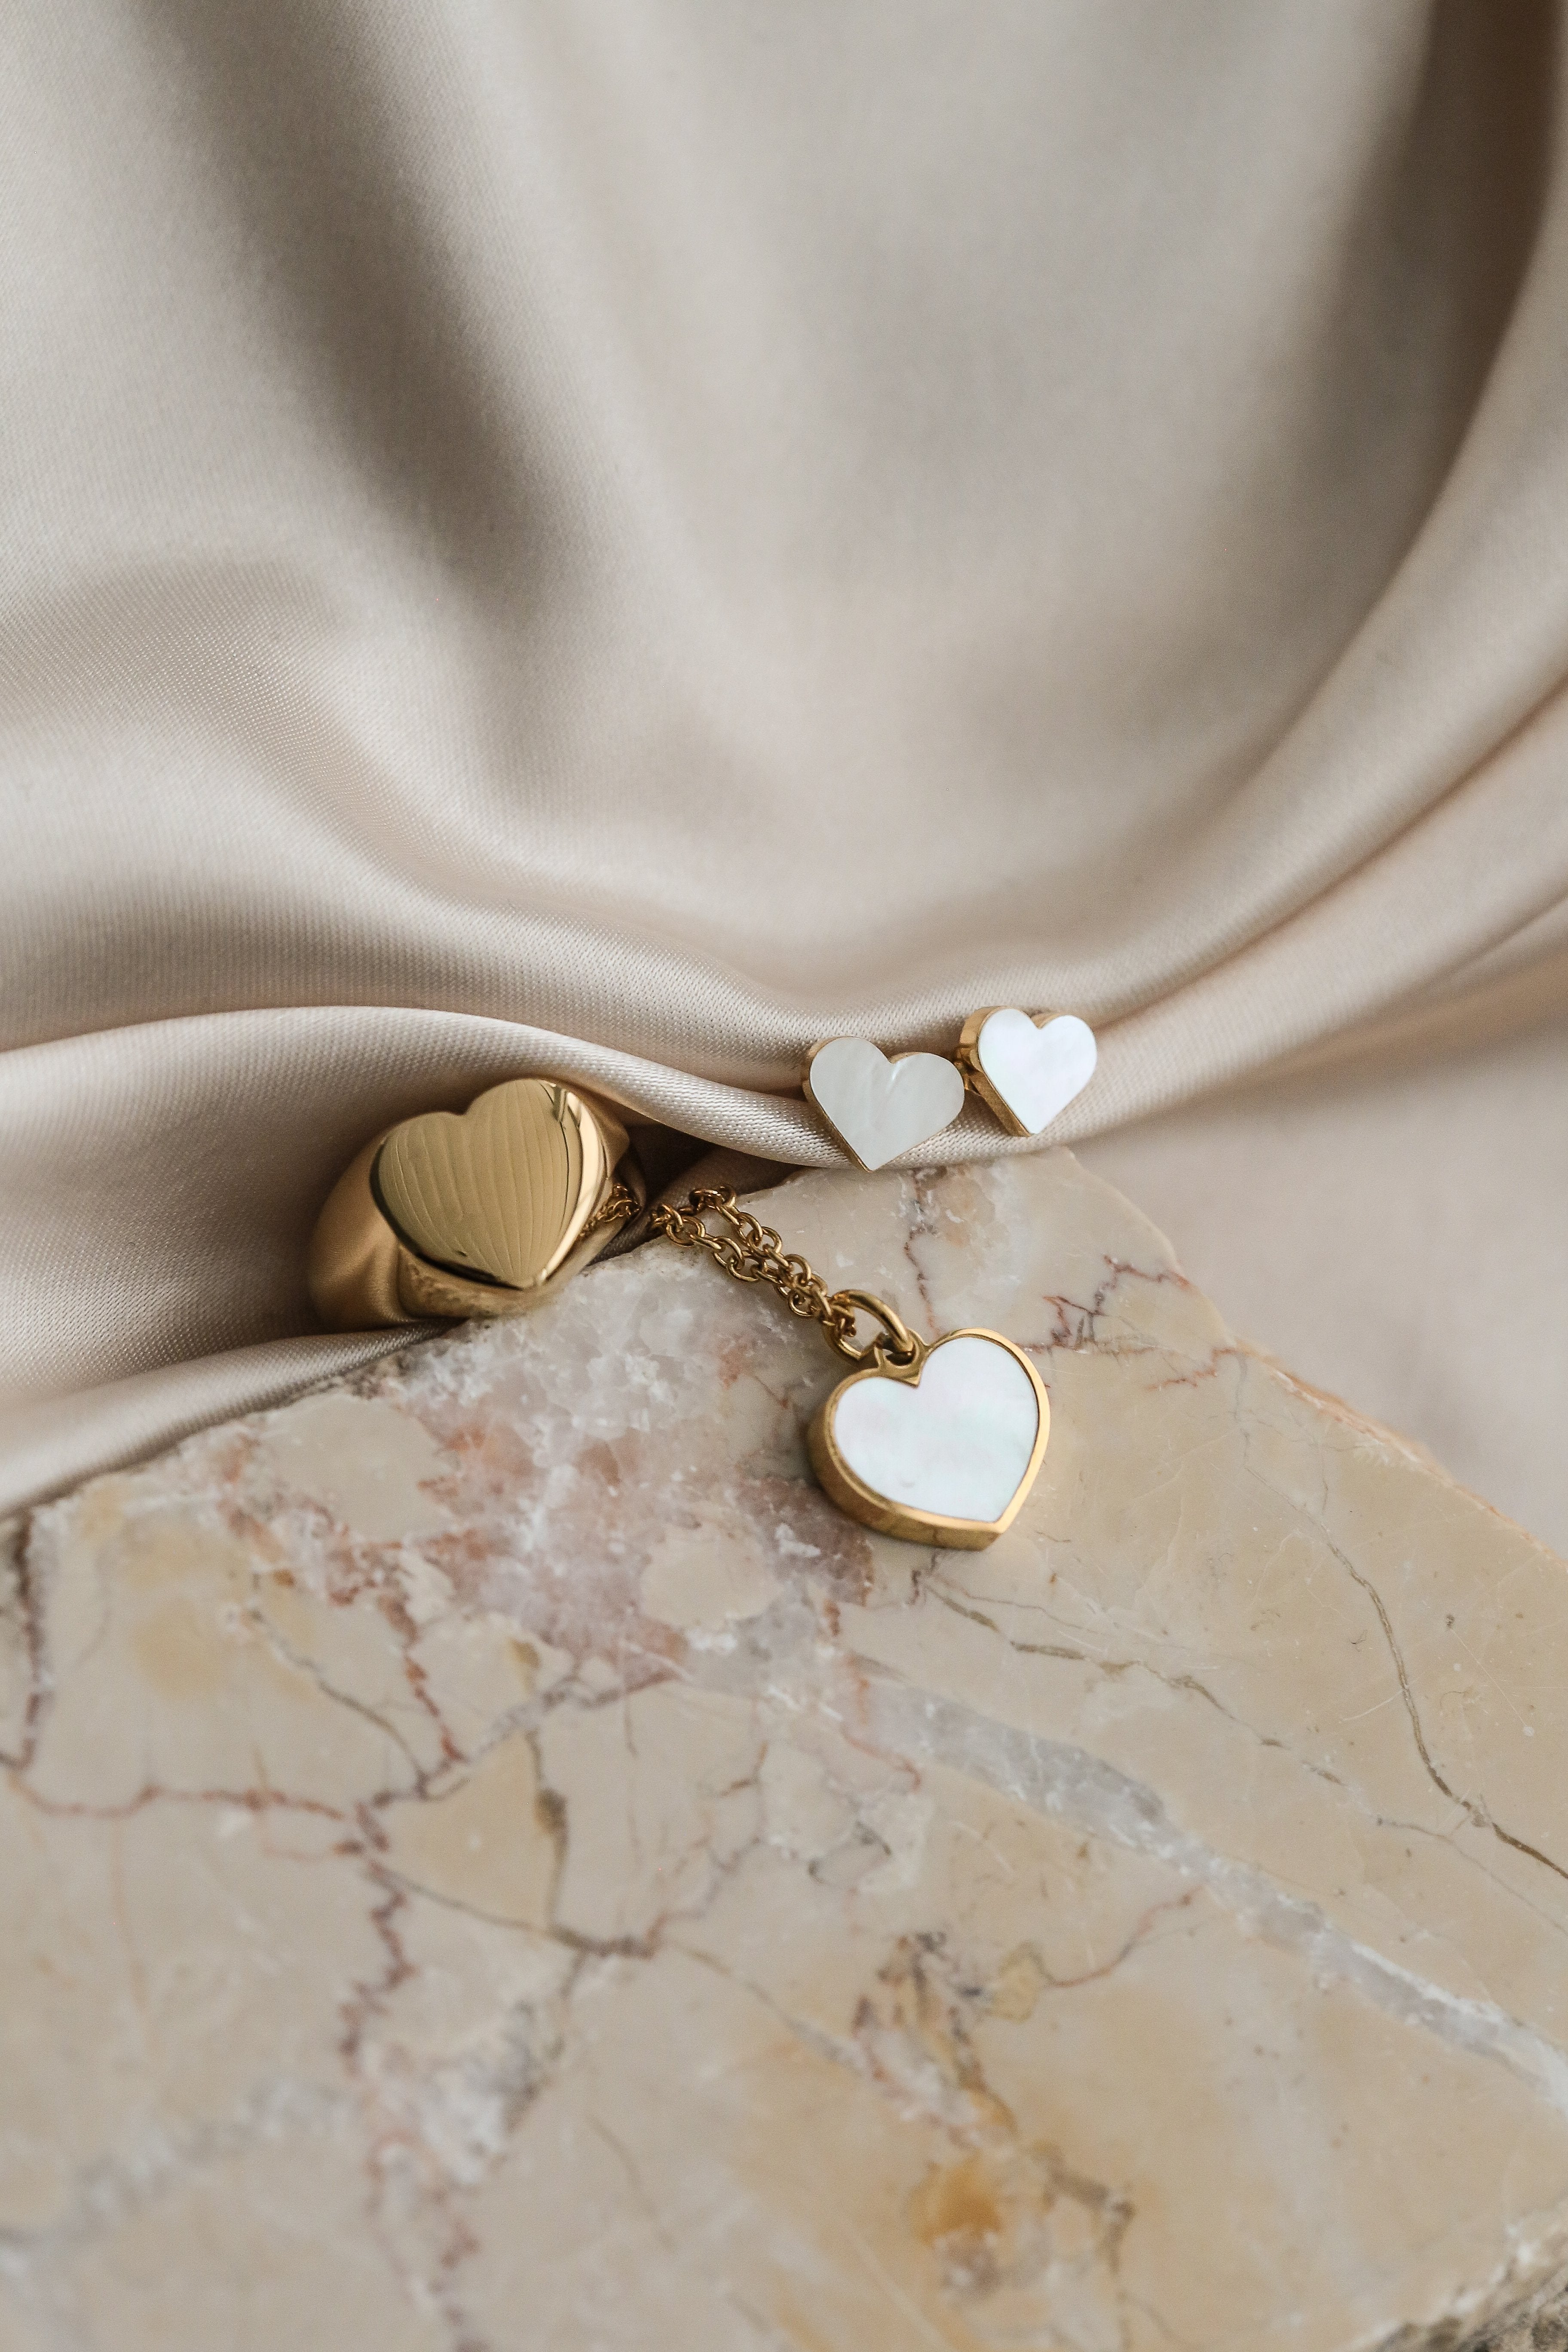 Cecile Ring - Boutique Minimaliste has waterproof, durable, elegant and vintage inspired jewelry